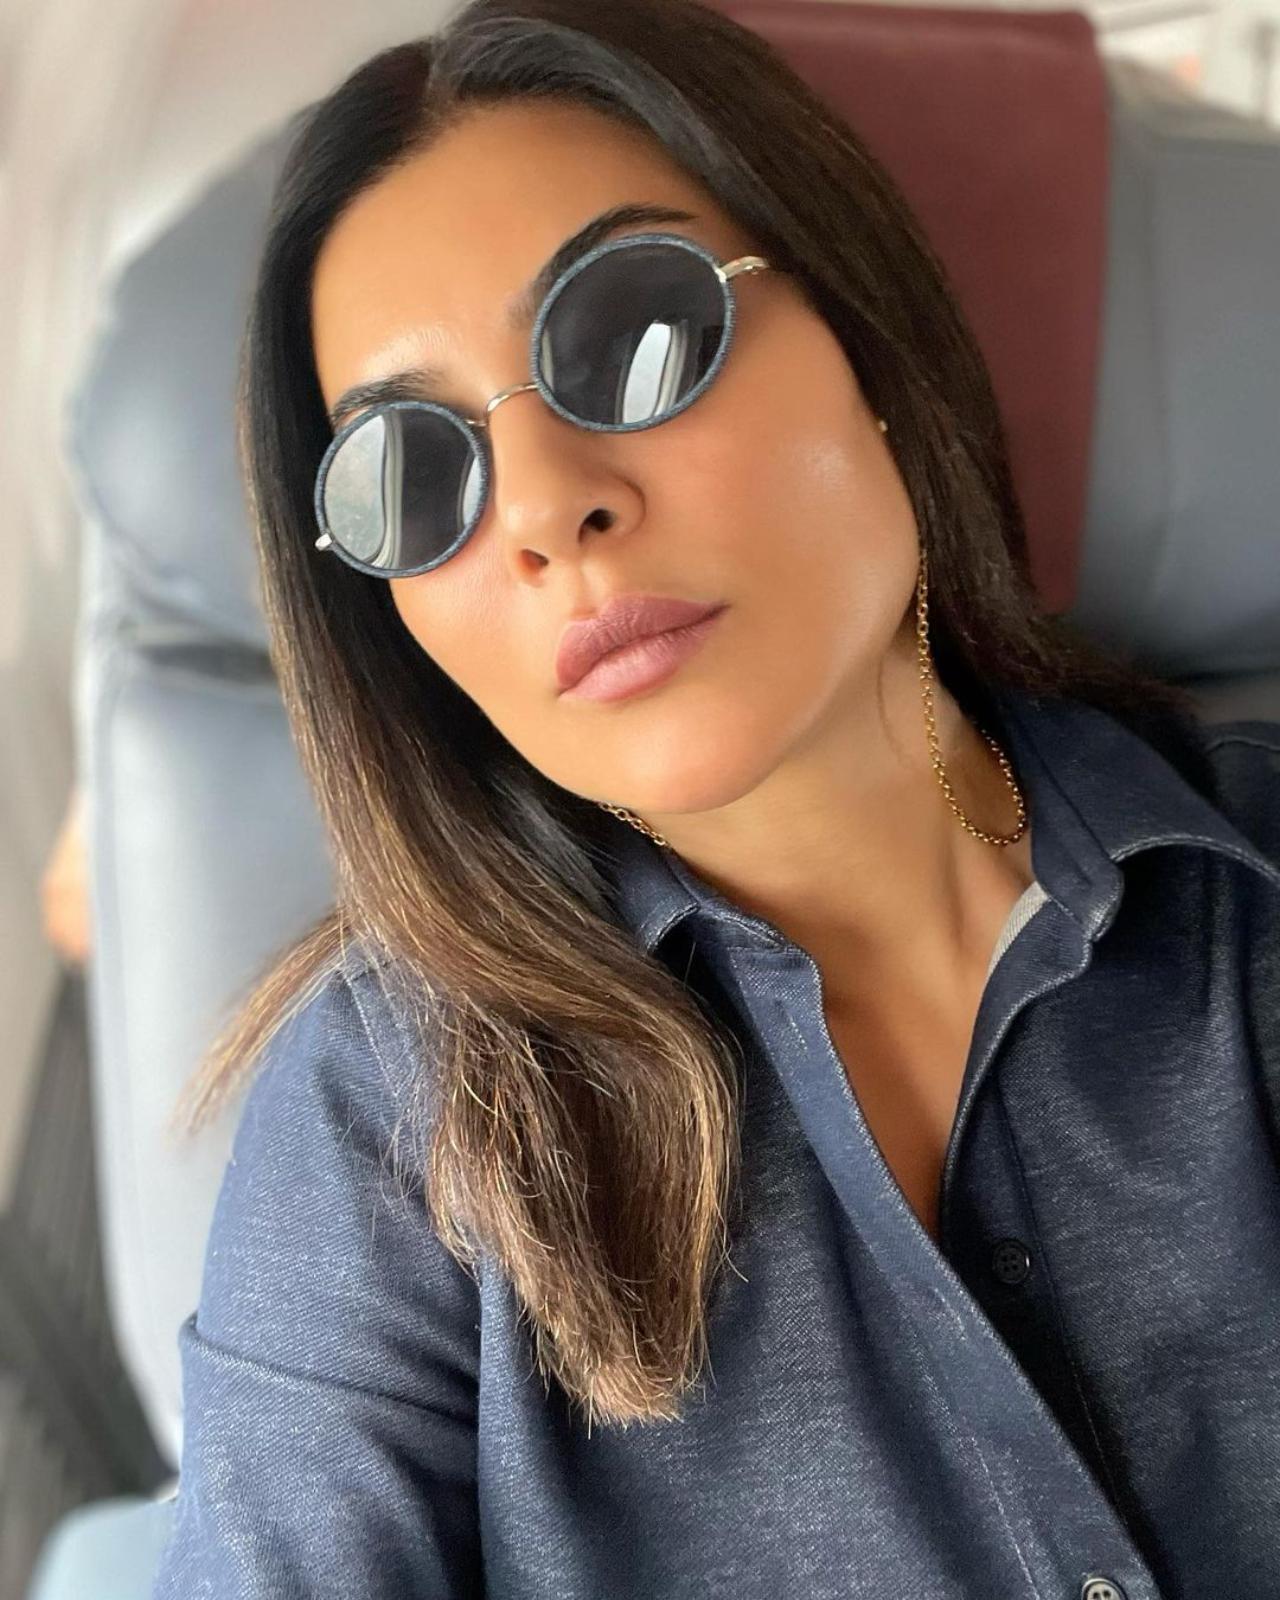 Enjoying the journey
Sushmita Sen might have had thousands of plane rides in her life, but she has renewed enthusiasm for every journey. 